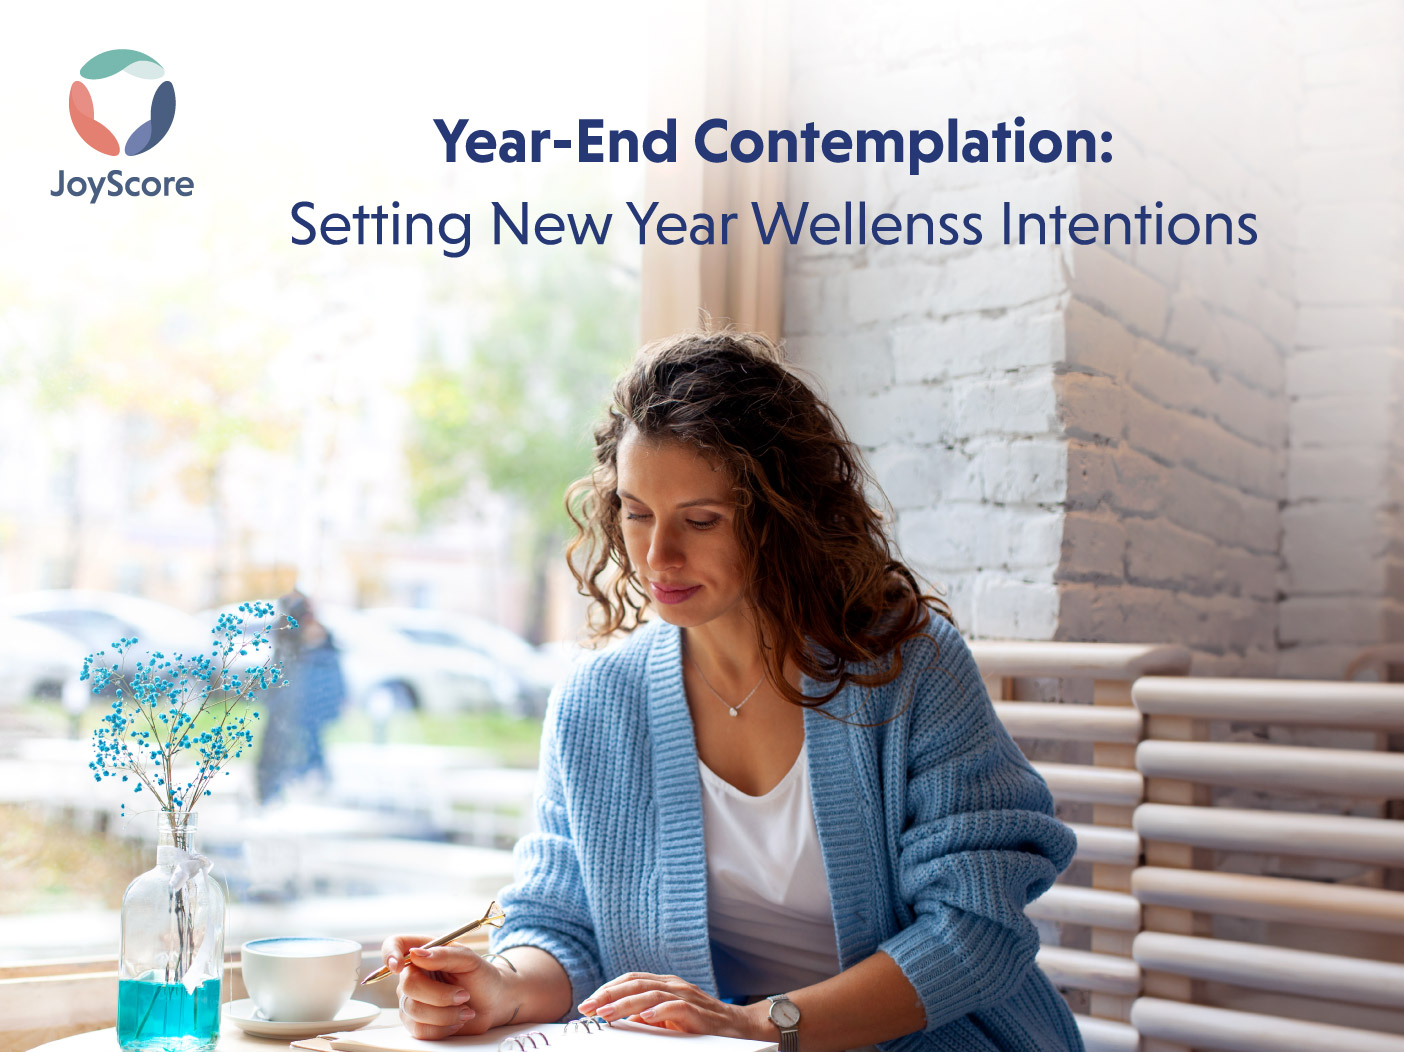 Ear-End Contemplation:Setting Wellness Intentions for the New Year